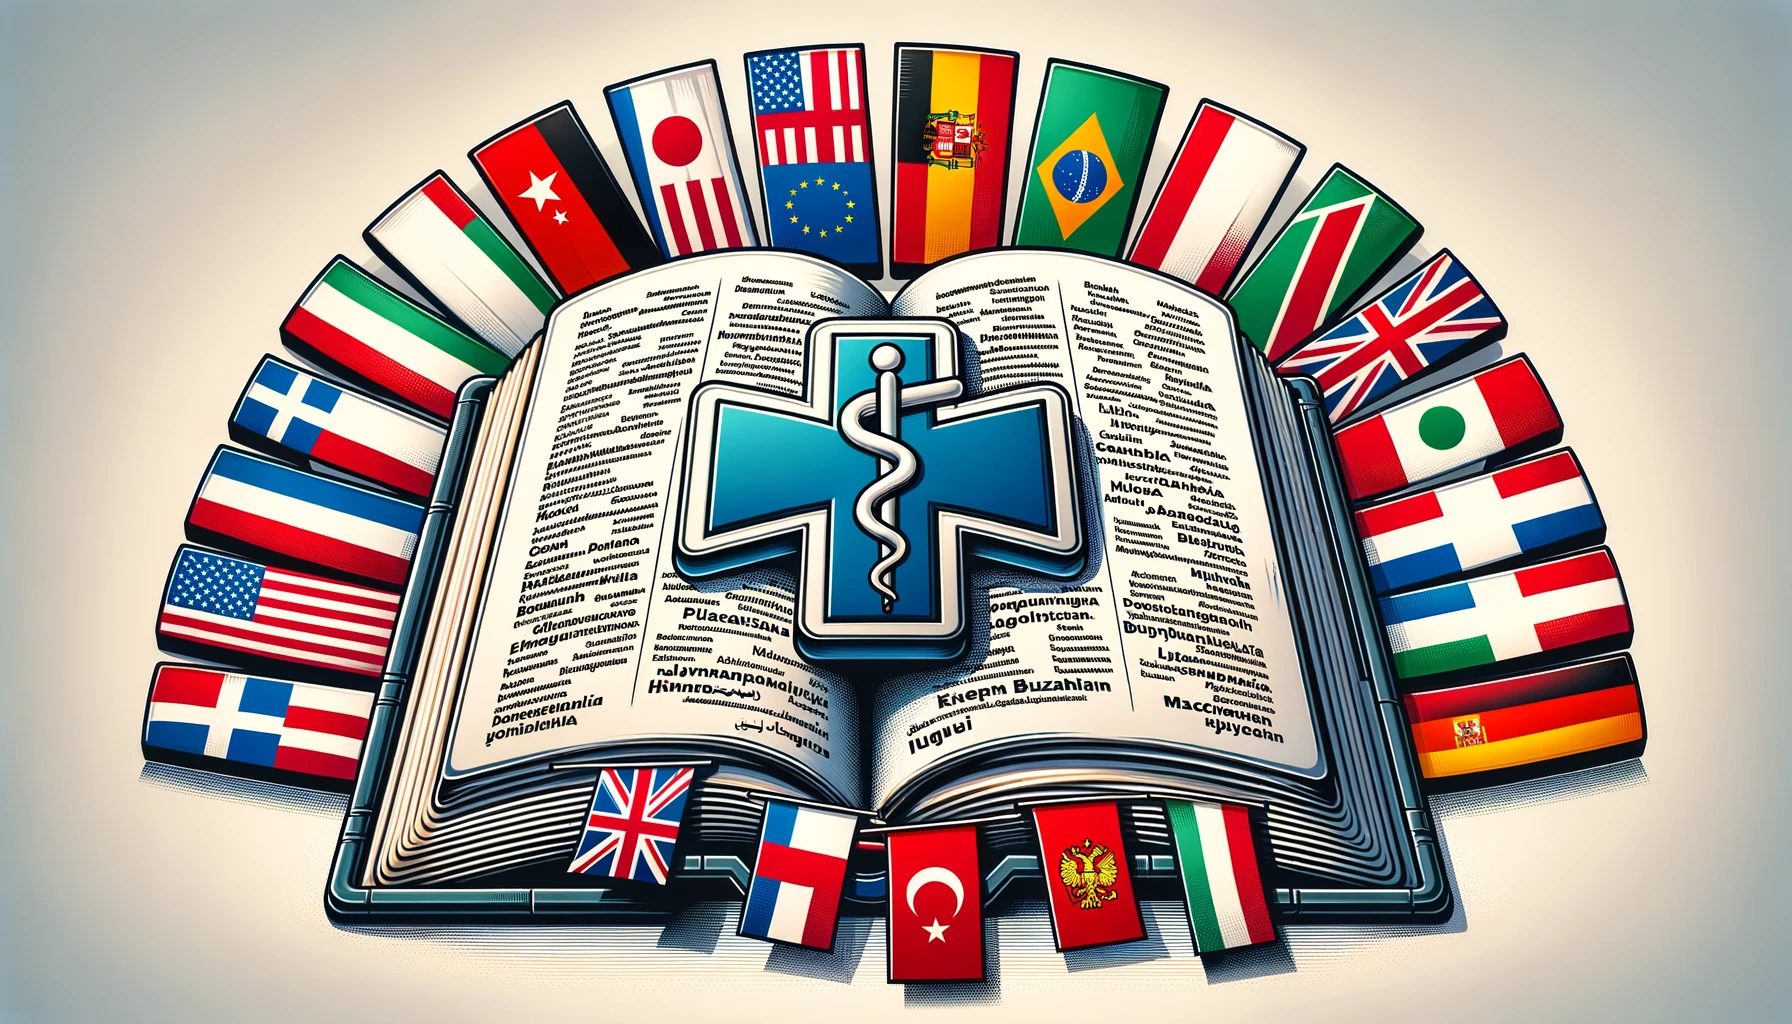 Open book with medical symbol and flags from various countries.